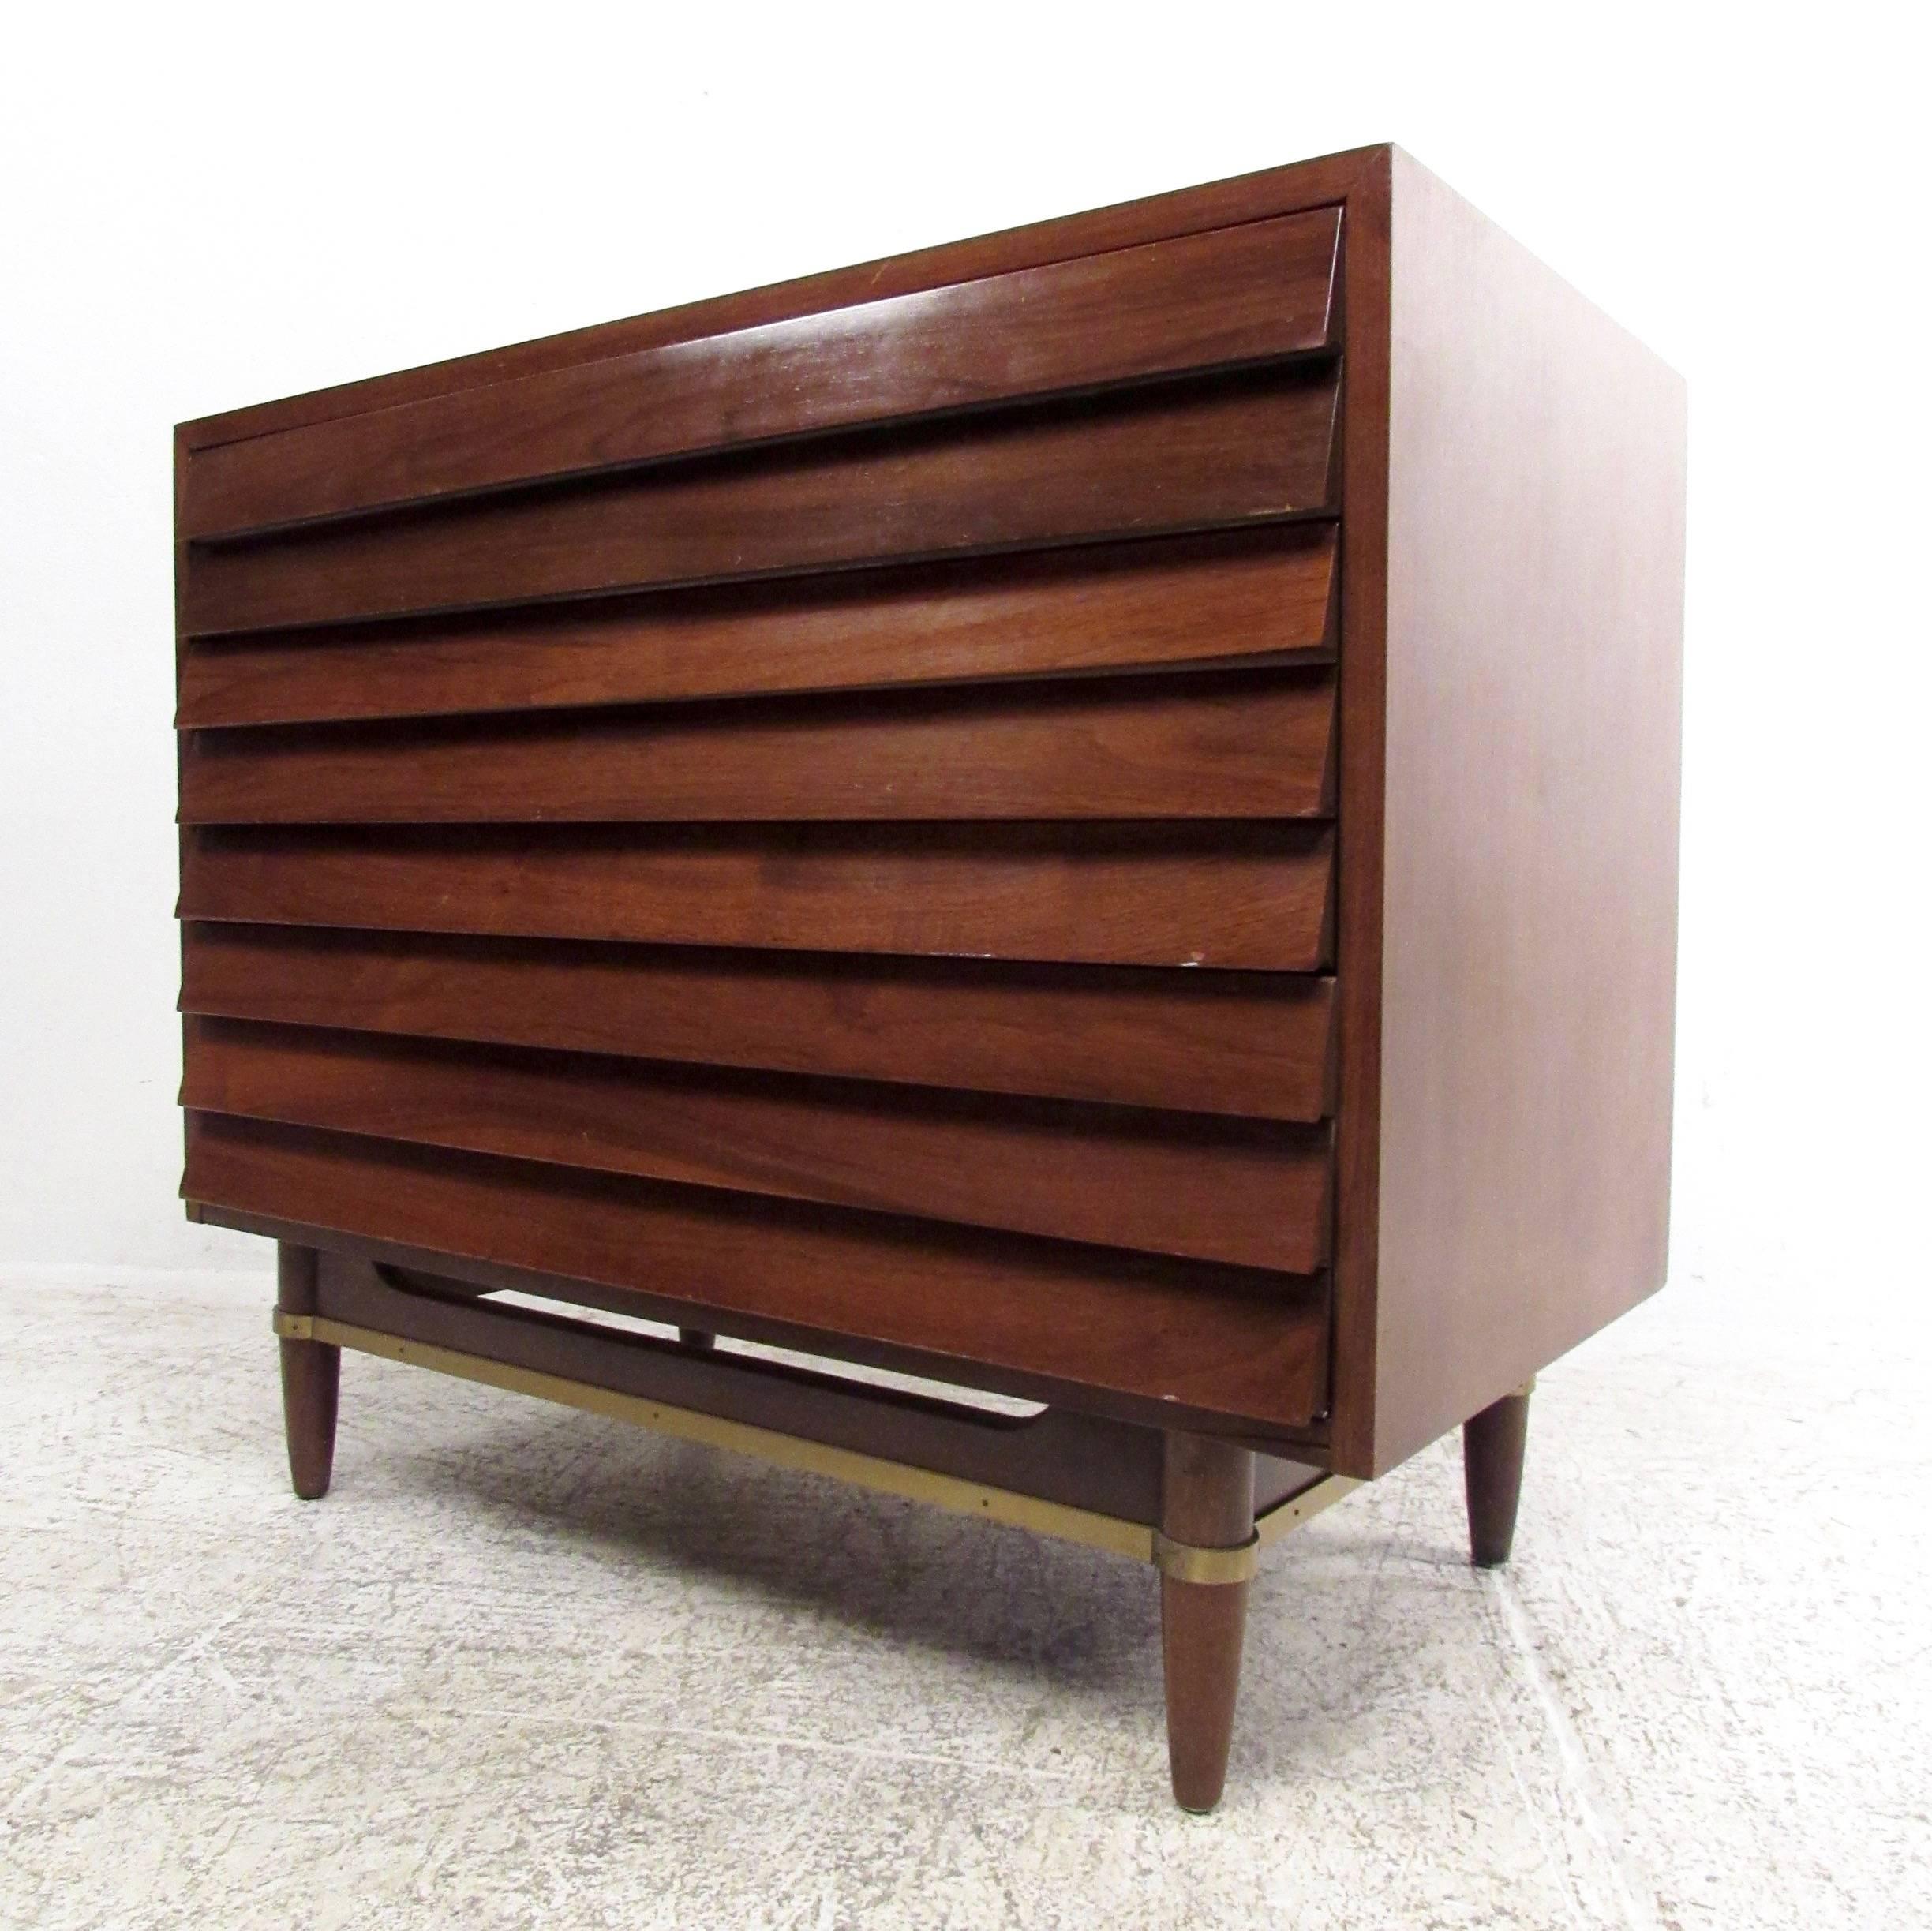 This matching pair of Mid-Century Modern sculpted front chests features three-drawer construction for plenty of storage with unique louvered front design. Vintage walnut finish and quality construction are accented by brass stretchers and drawer